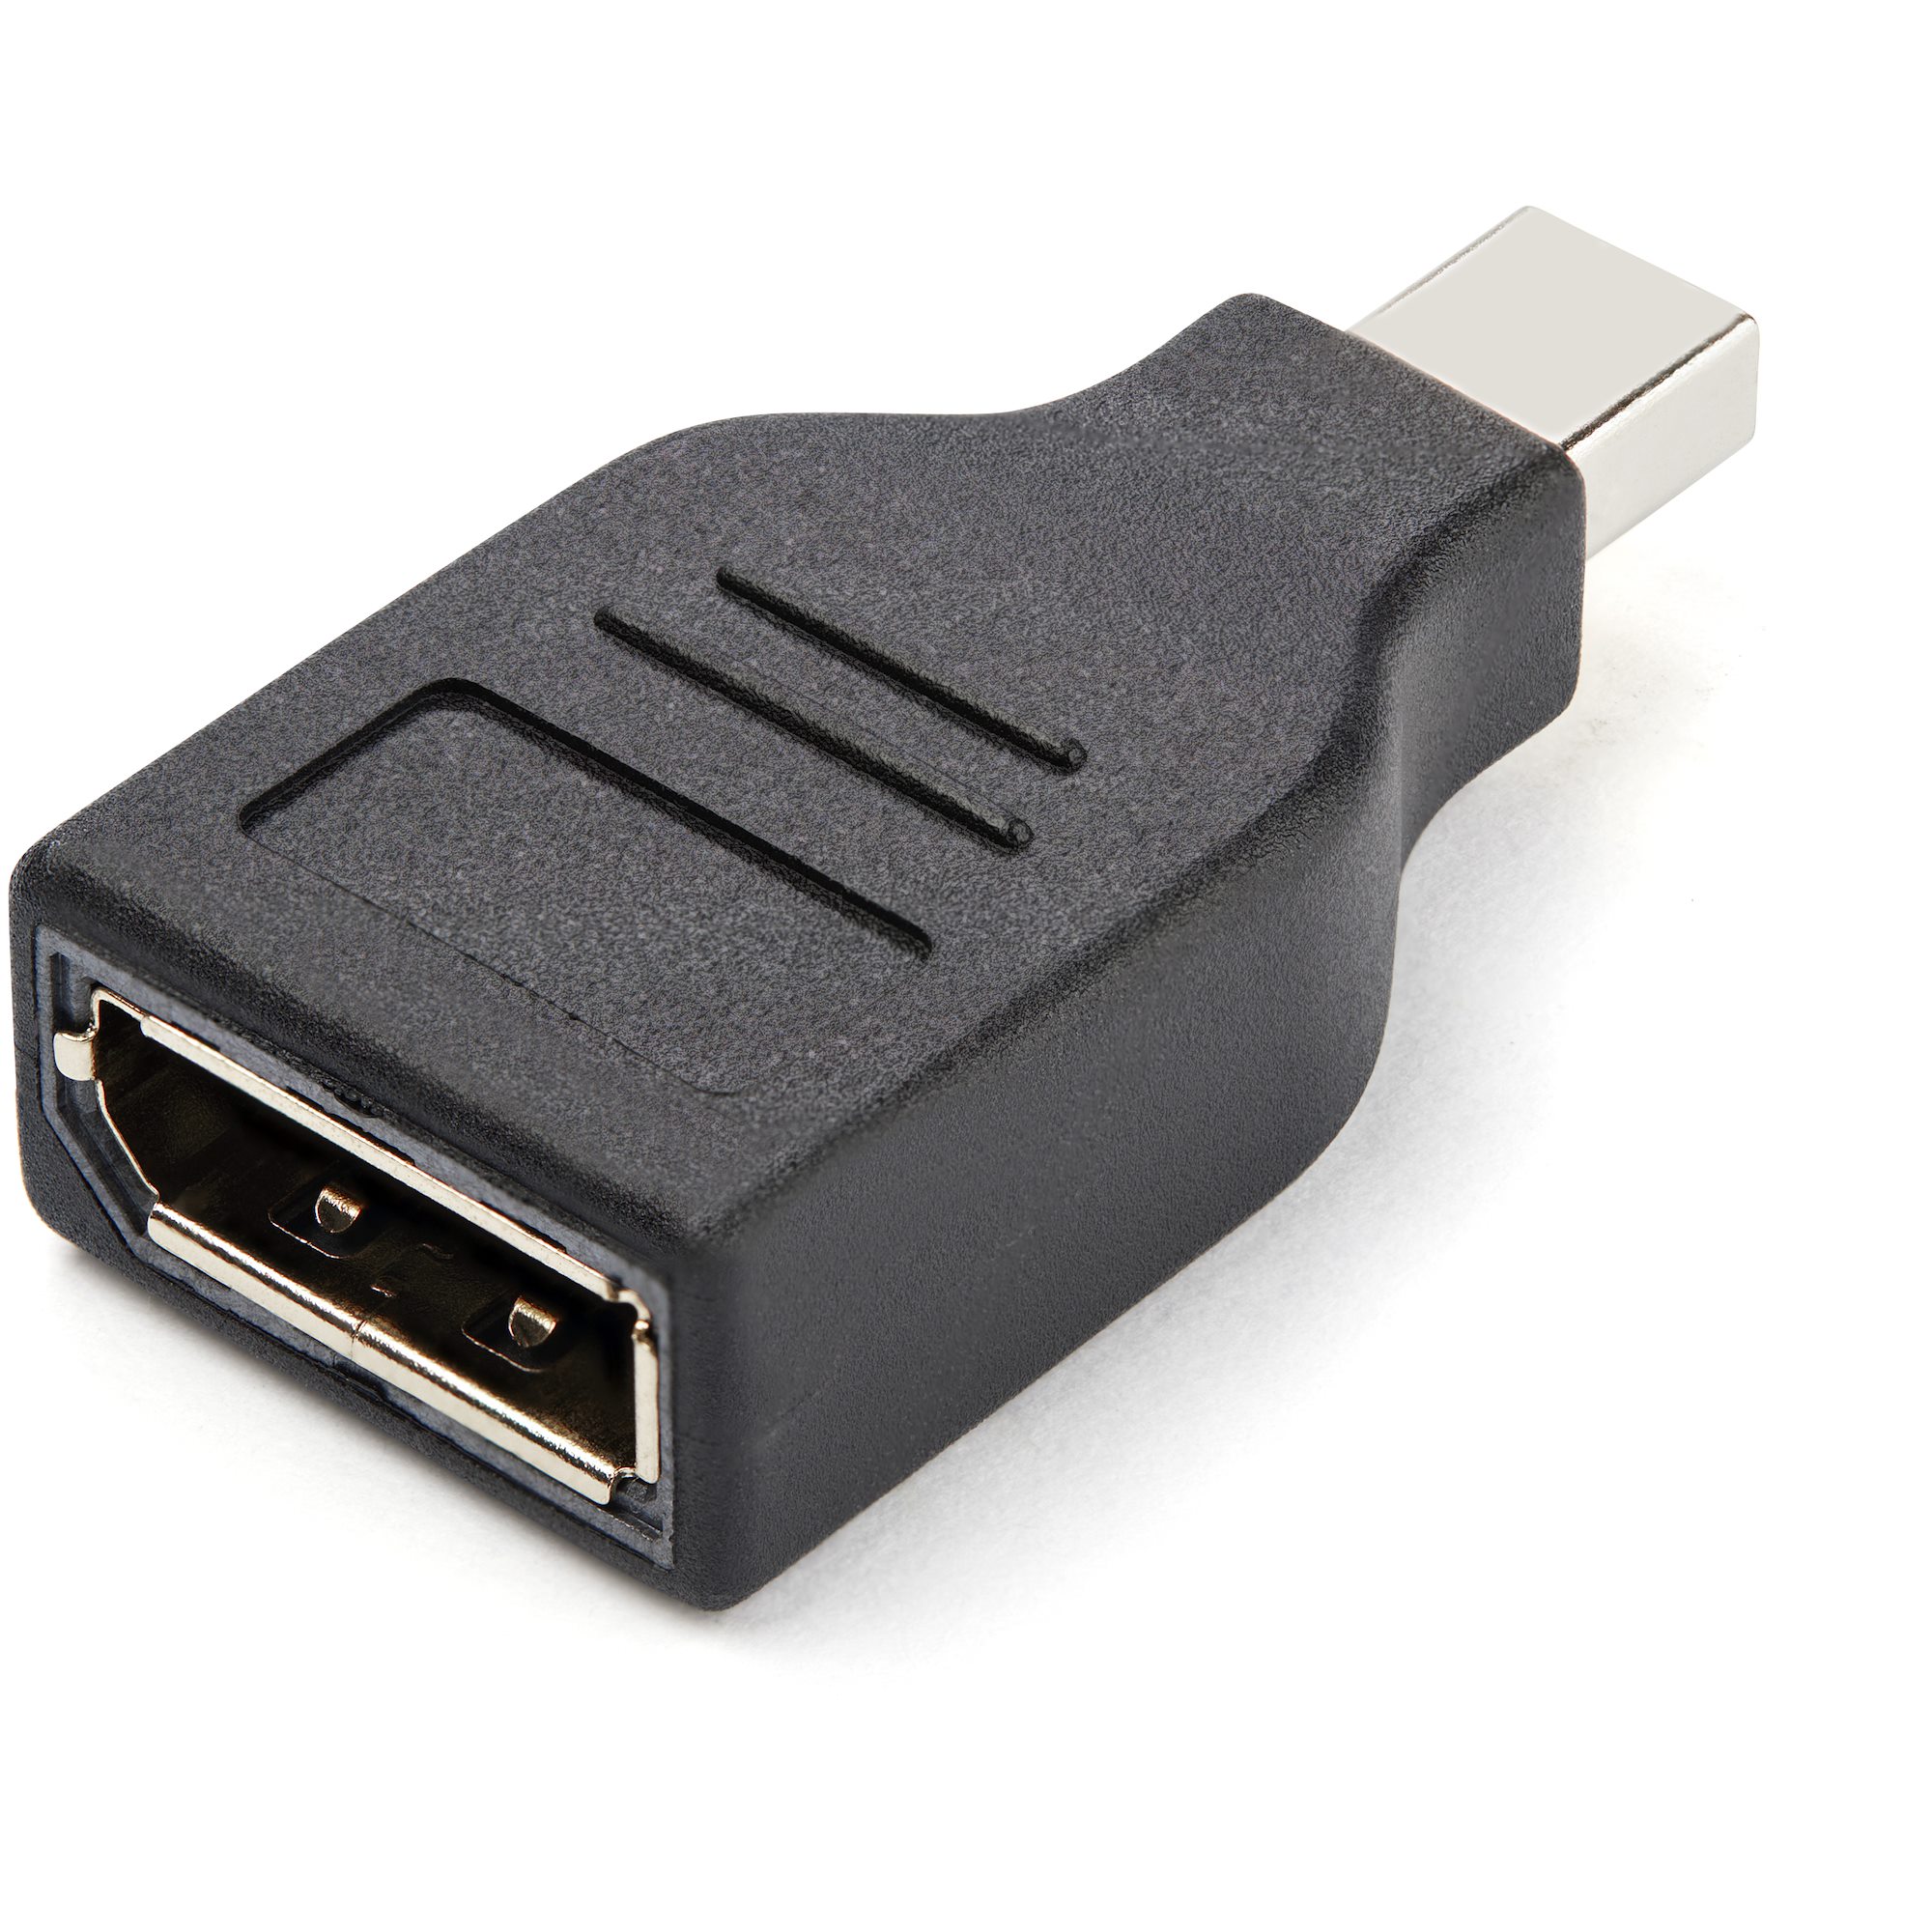 StarTech.com 6ft Mini DisplayPort to DisplayPort 1.2 Cable - 4K x 2K mDP to  DP Adapter Cable